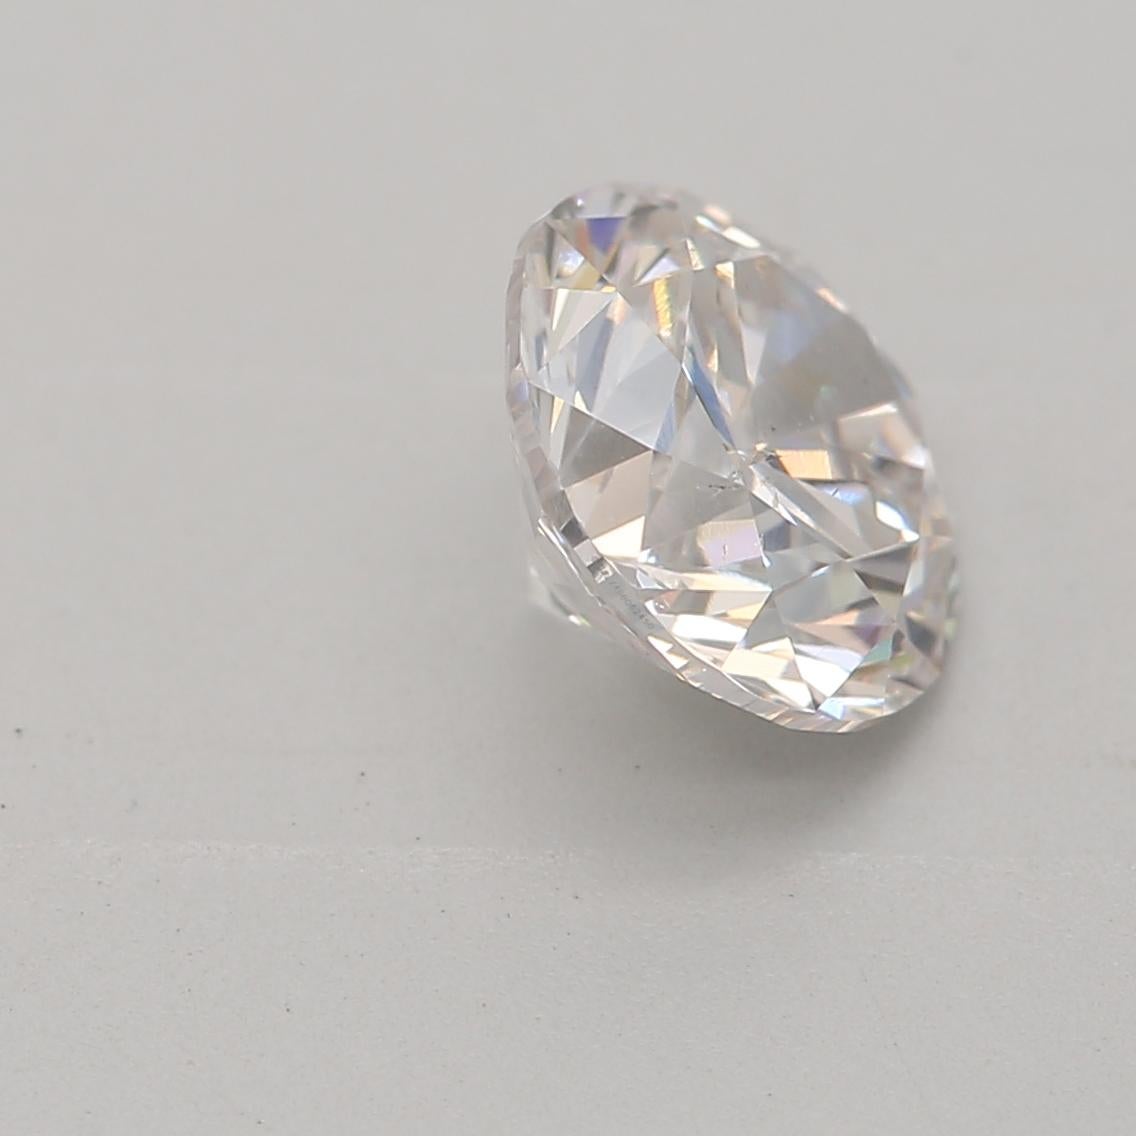 1 Carat Faint Pinkish Brown Round Cut Diamond SI2 Clarity GIA Certified For Sale 1